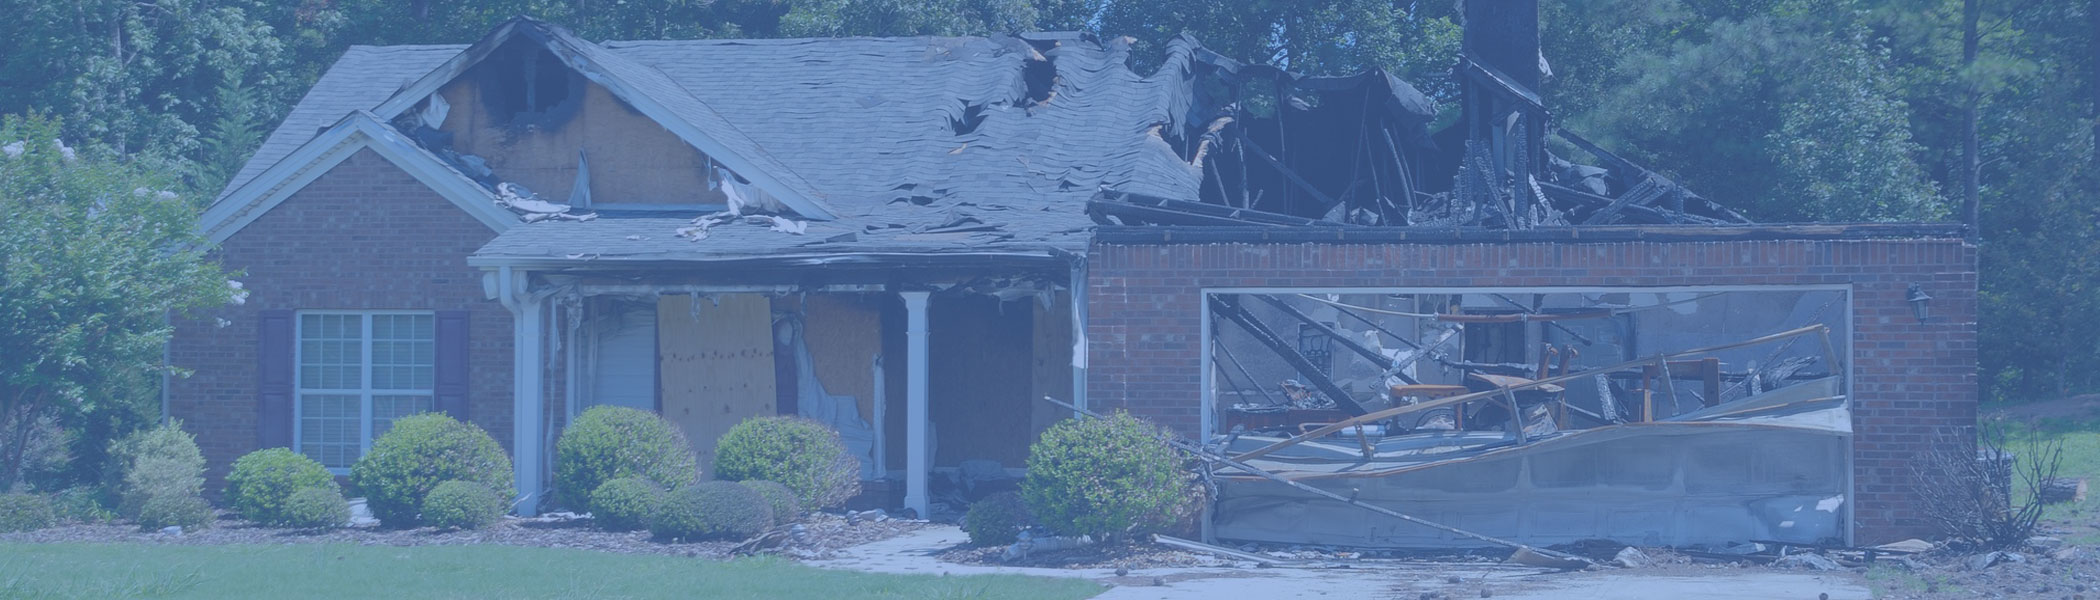 fire damage to home